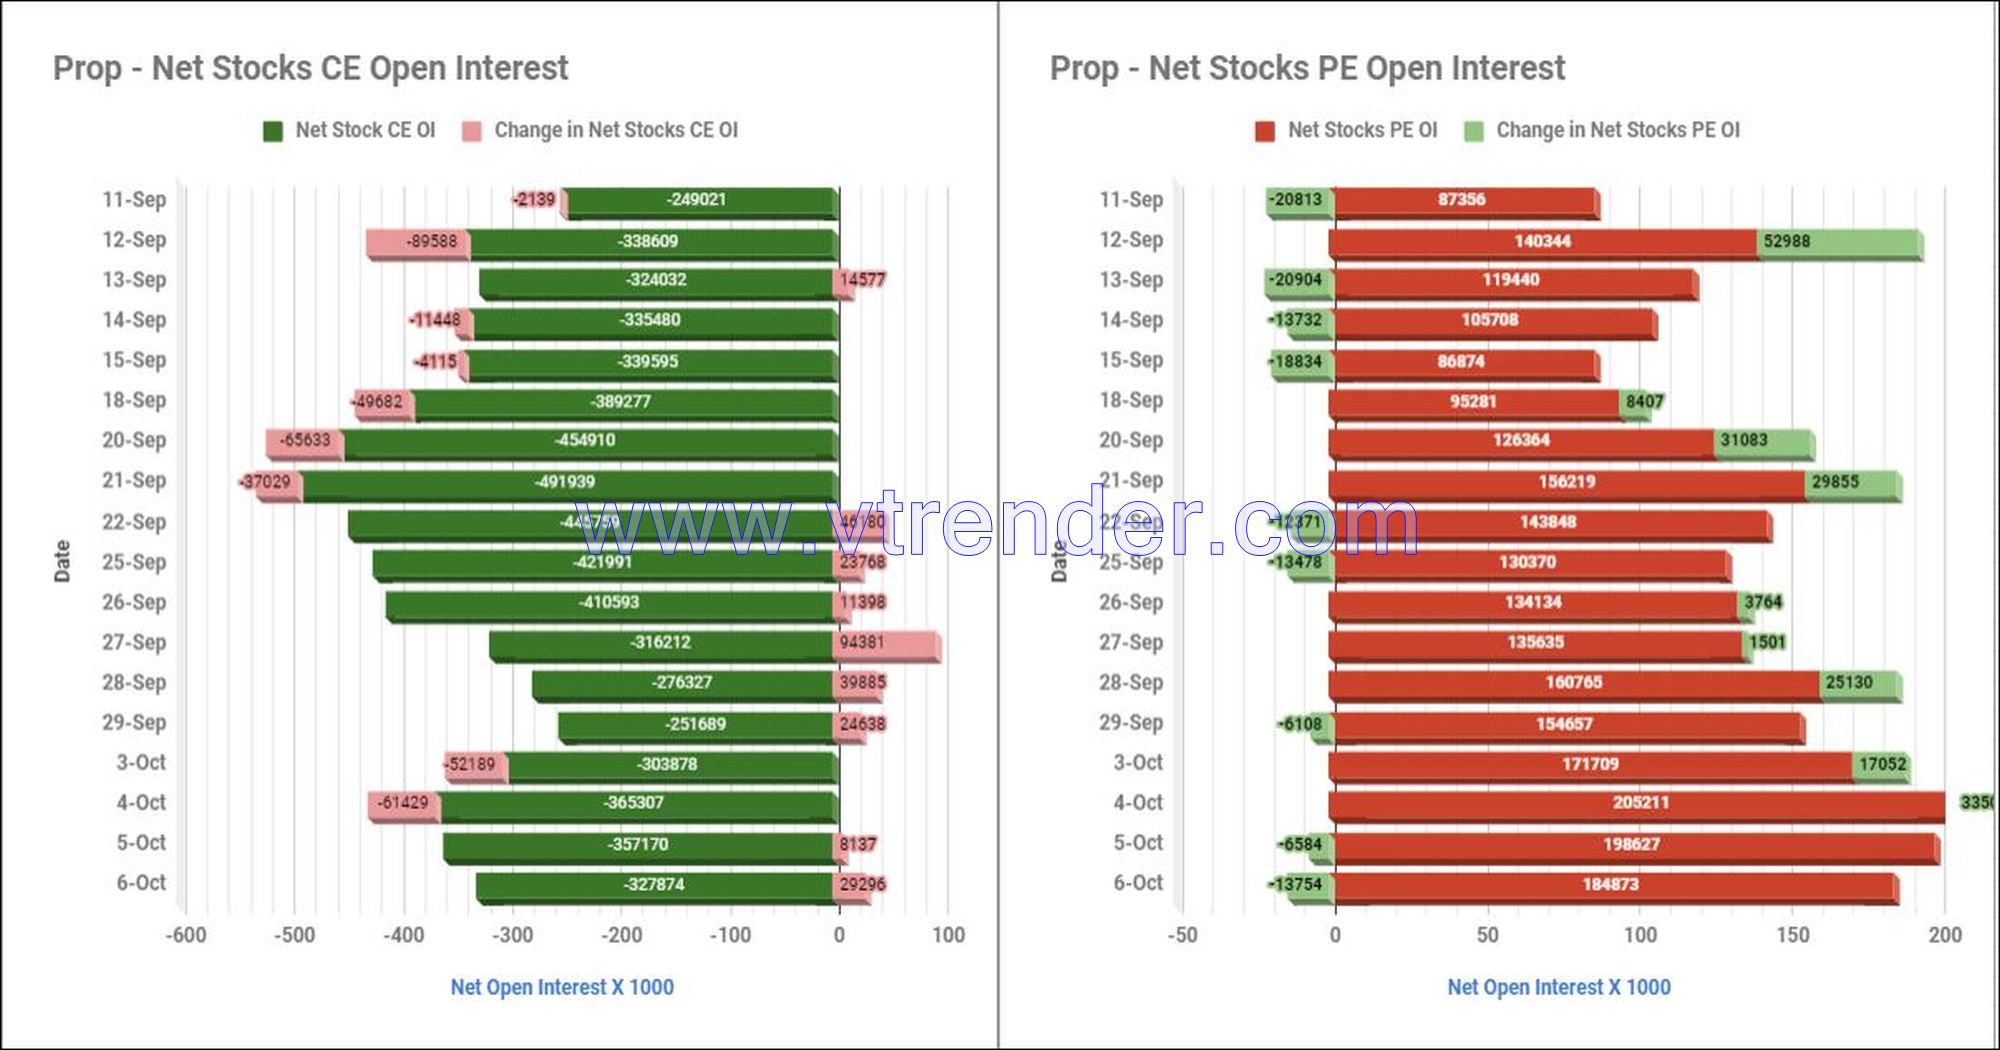 Prostop06Oct Participantwise Net Open Interest And Net Equity Investments – 6Th Oct 2023 Ce, Client, Dii, Fii, Index Futures, Index Options, Open Interest, Pe, Prop, Stocks Futures